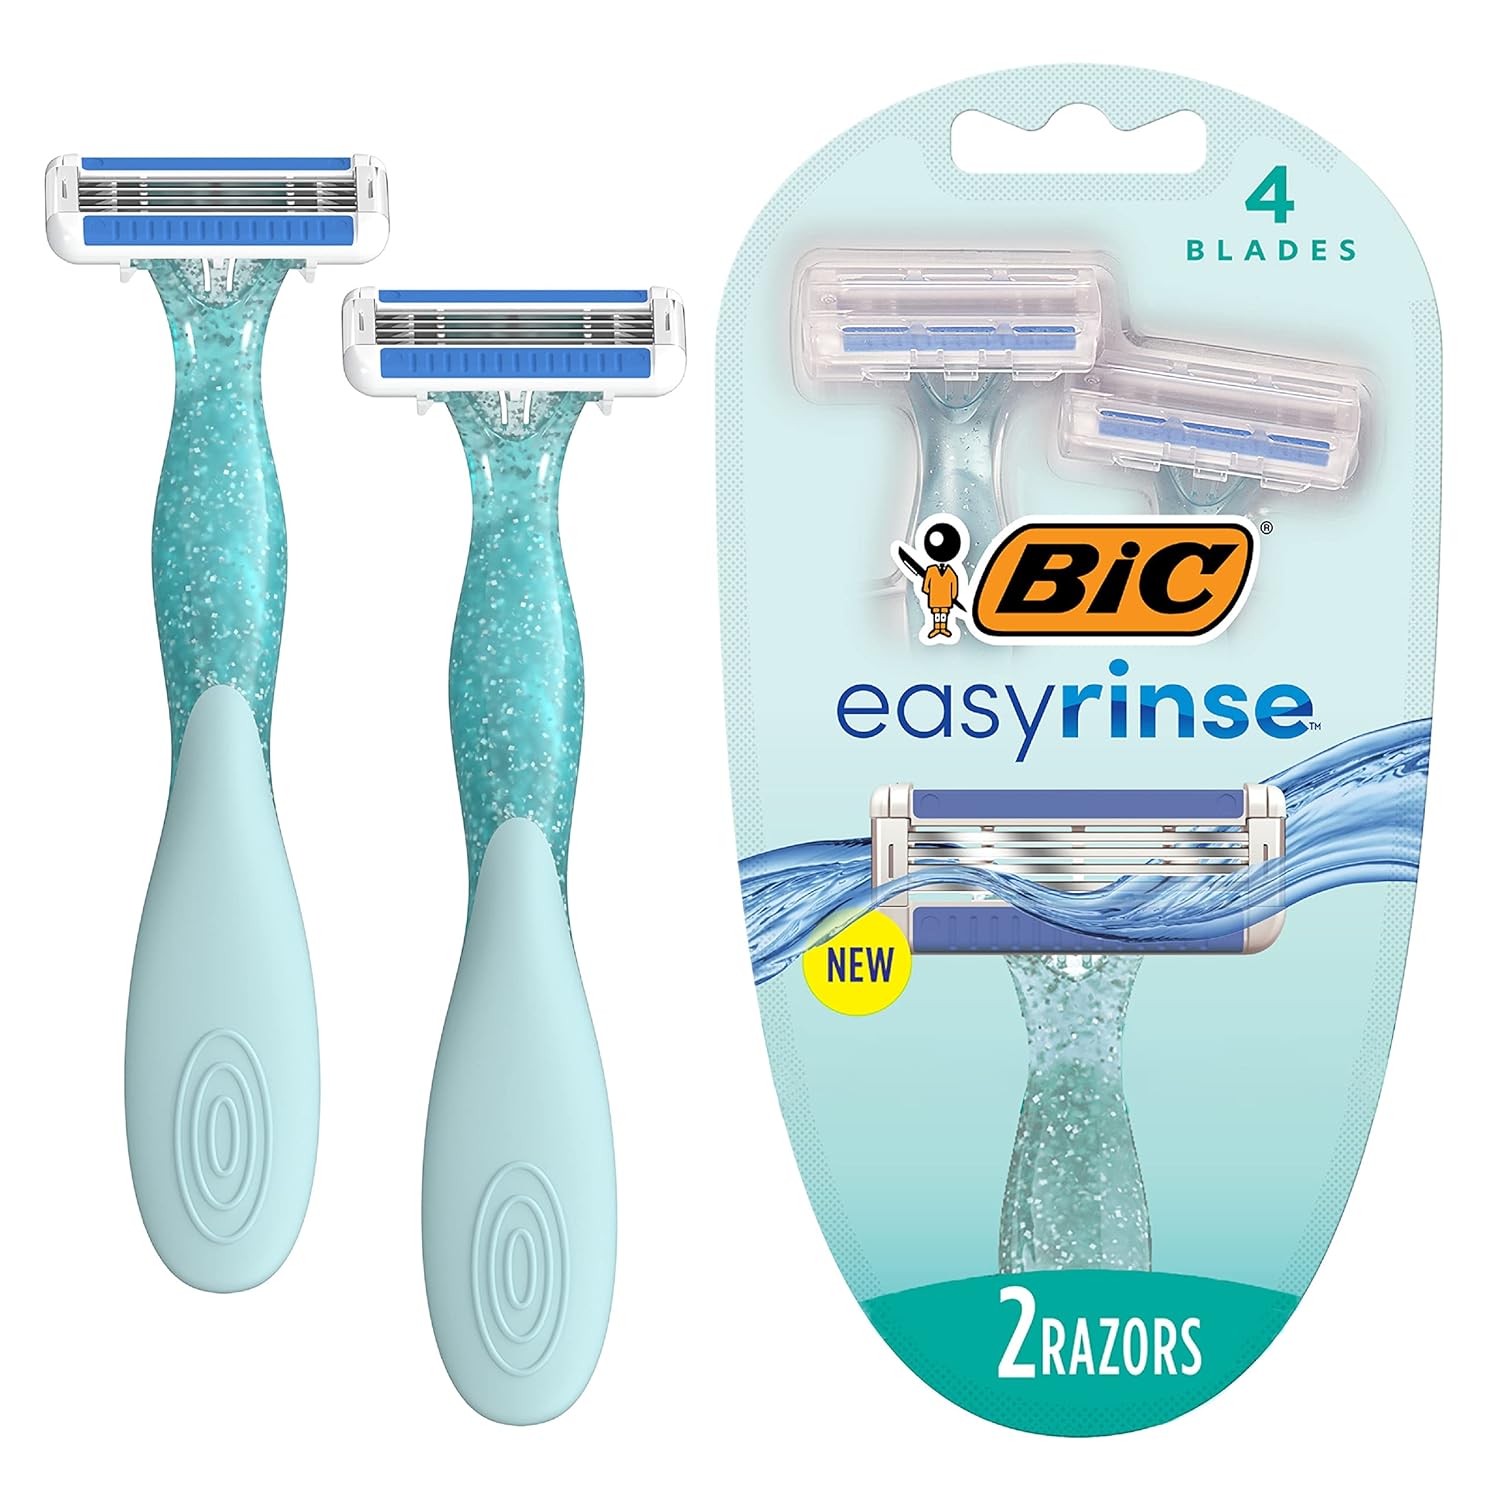 2-Count BiC EasyRinse Anti-Clogging Women's Disposable Razors w/ 4 Blades $2.65 ($1.33 each) w/ S&S + Free Shipping w/ Prime or on $35+